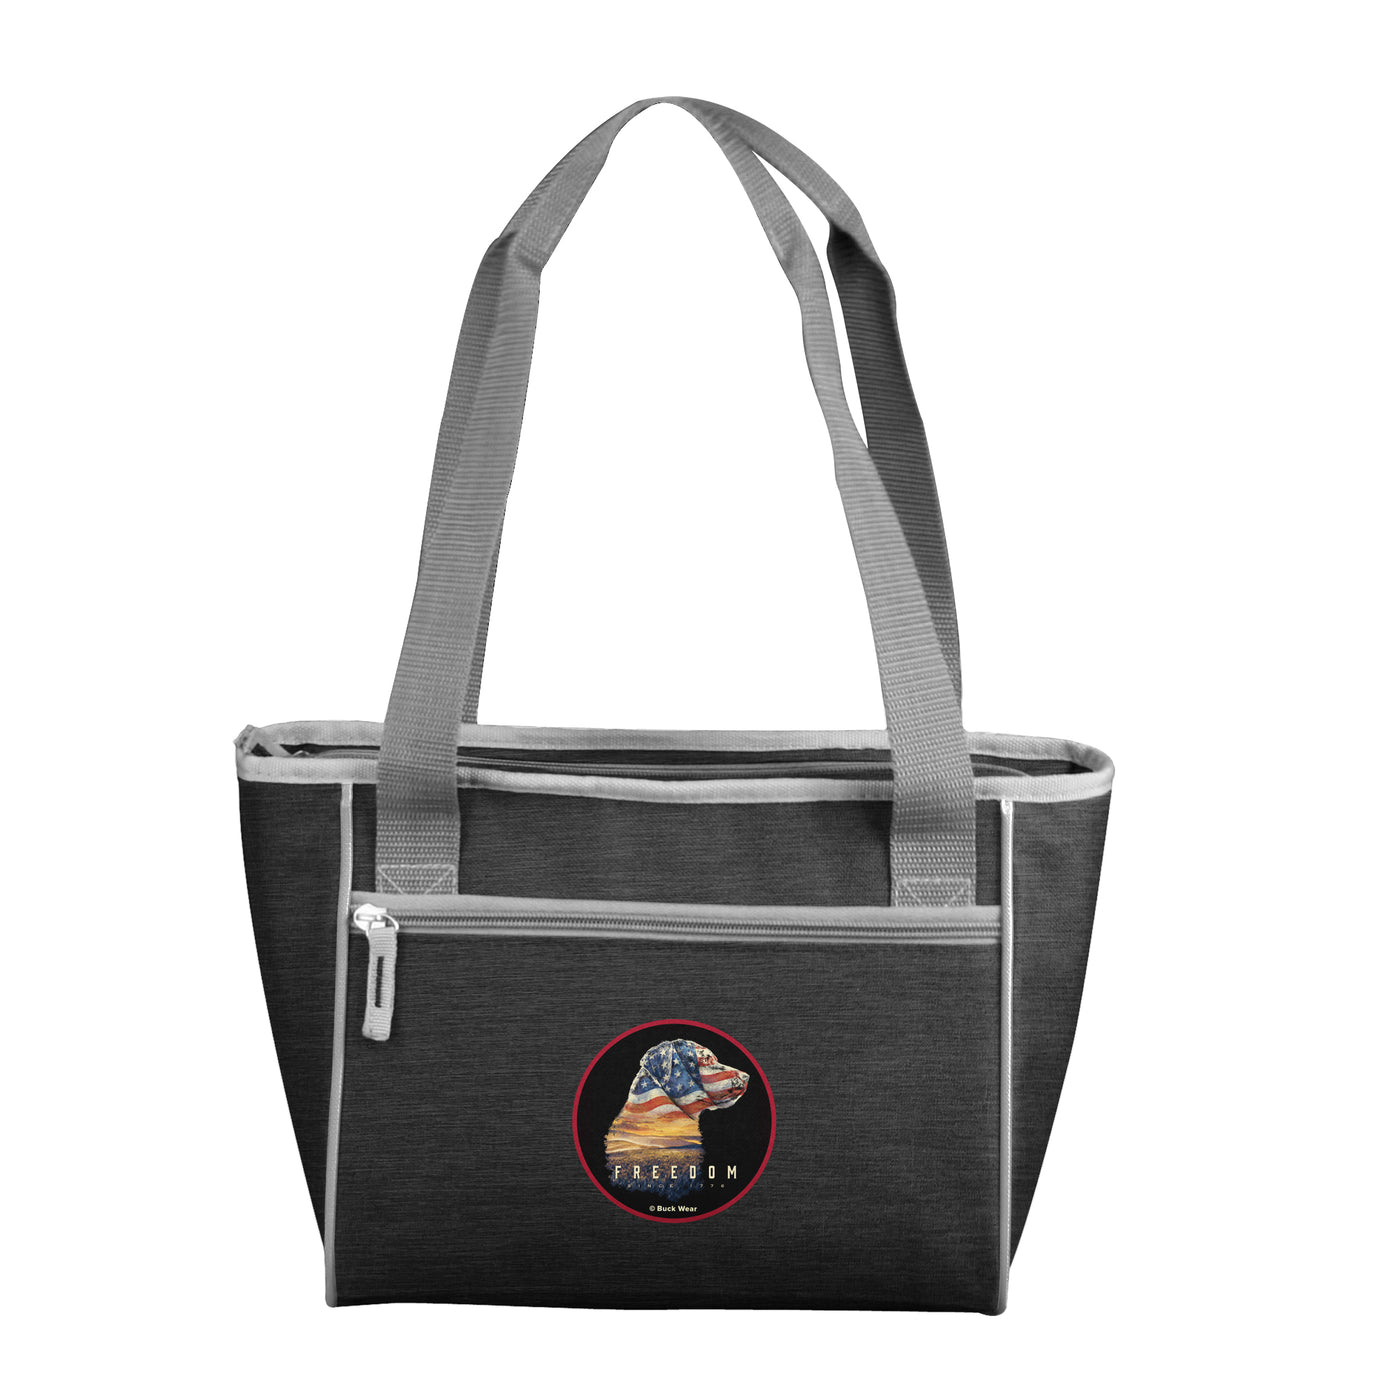 Flag Dog 16 Can Cooler Tote